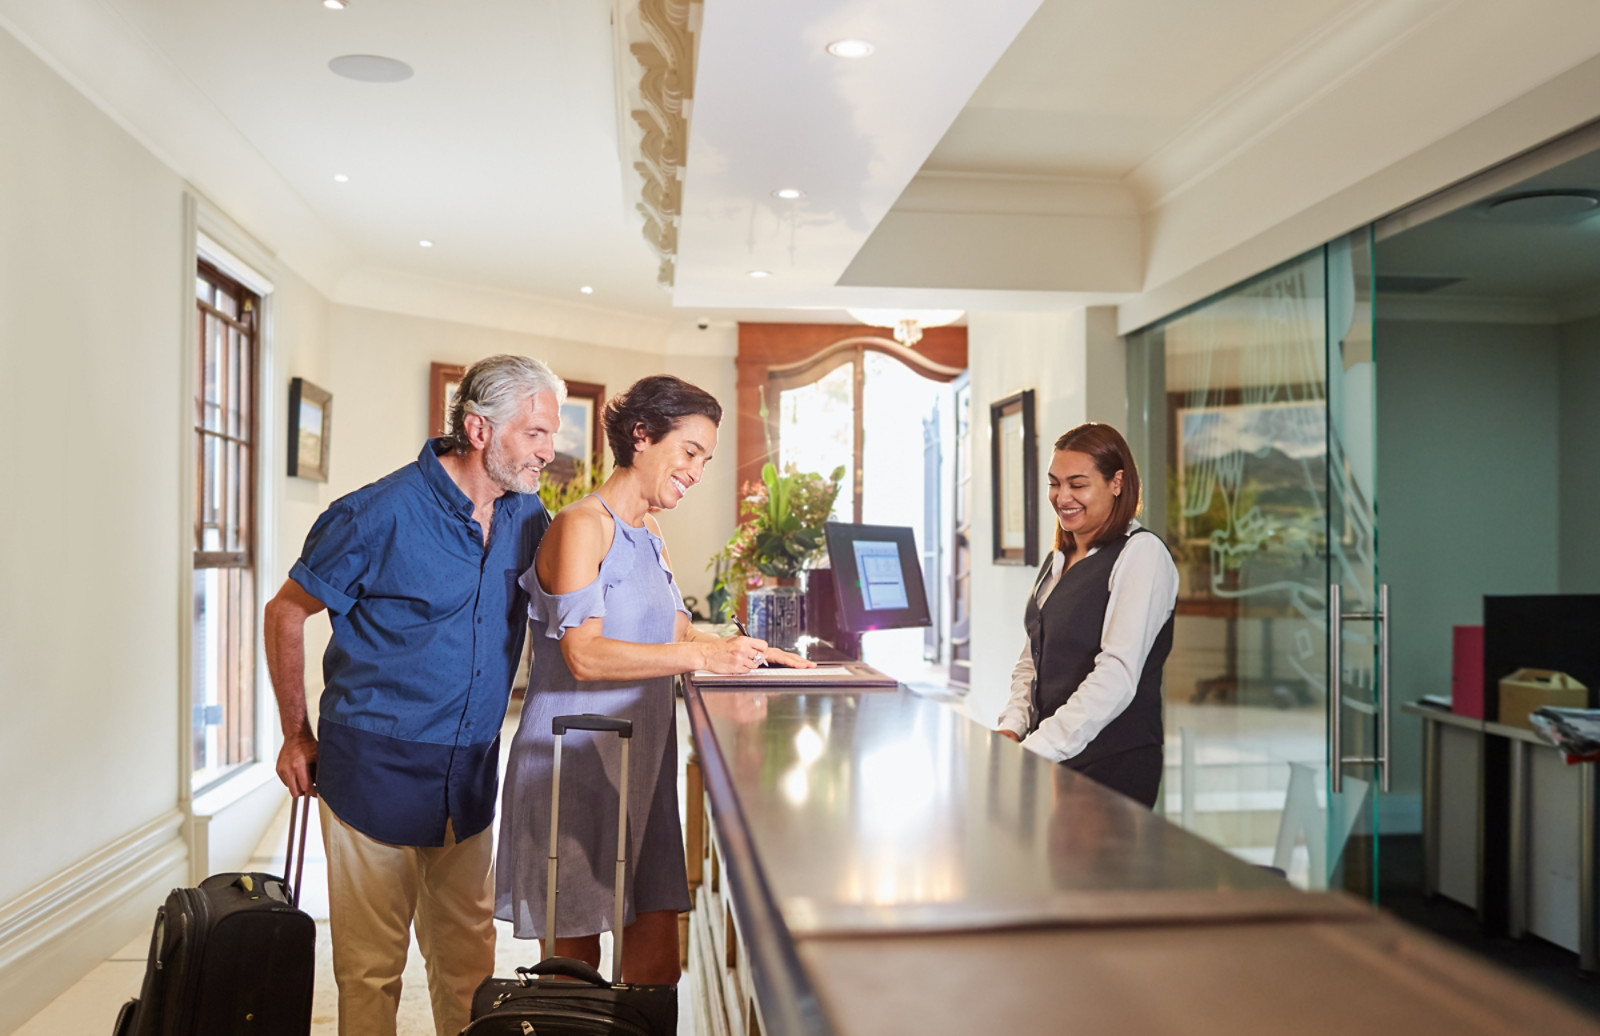 Mature couple with suitcases checking in at hotel reception